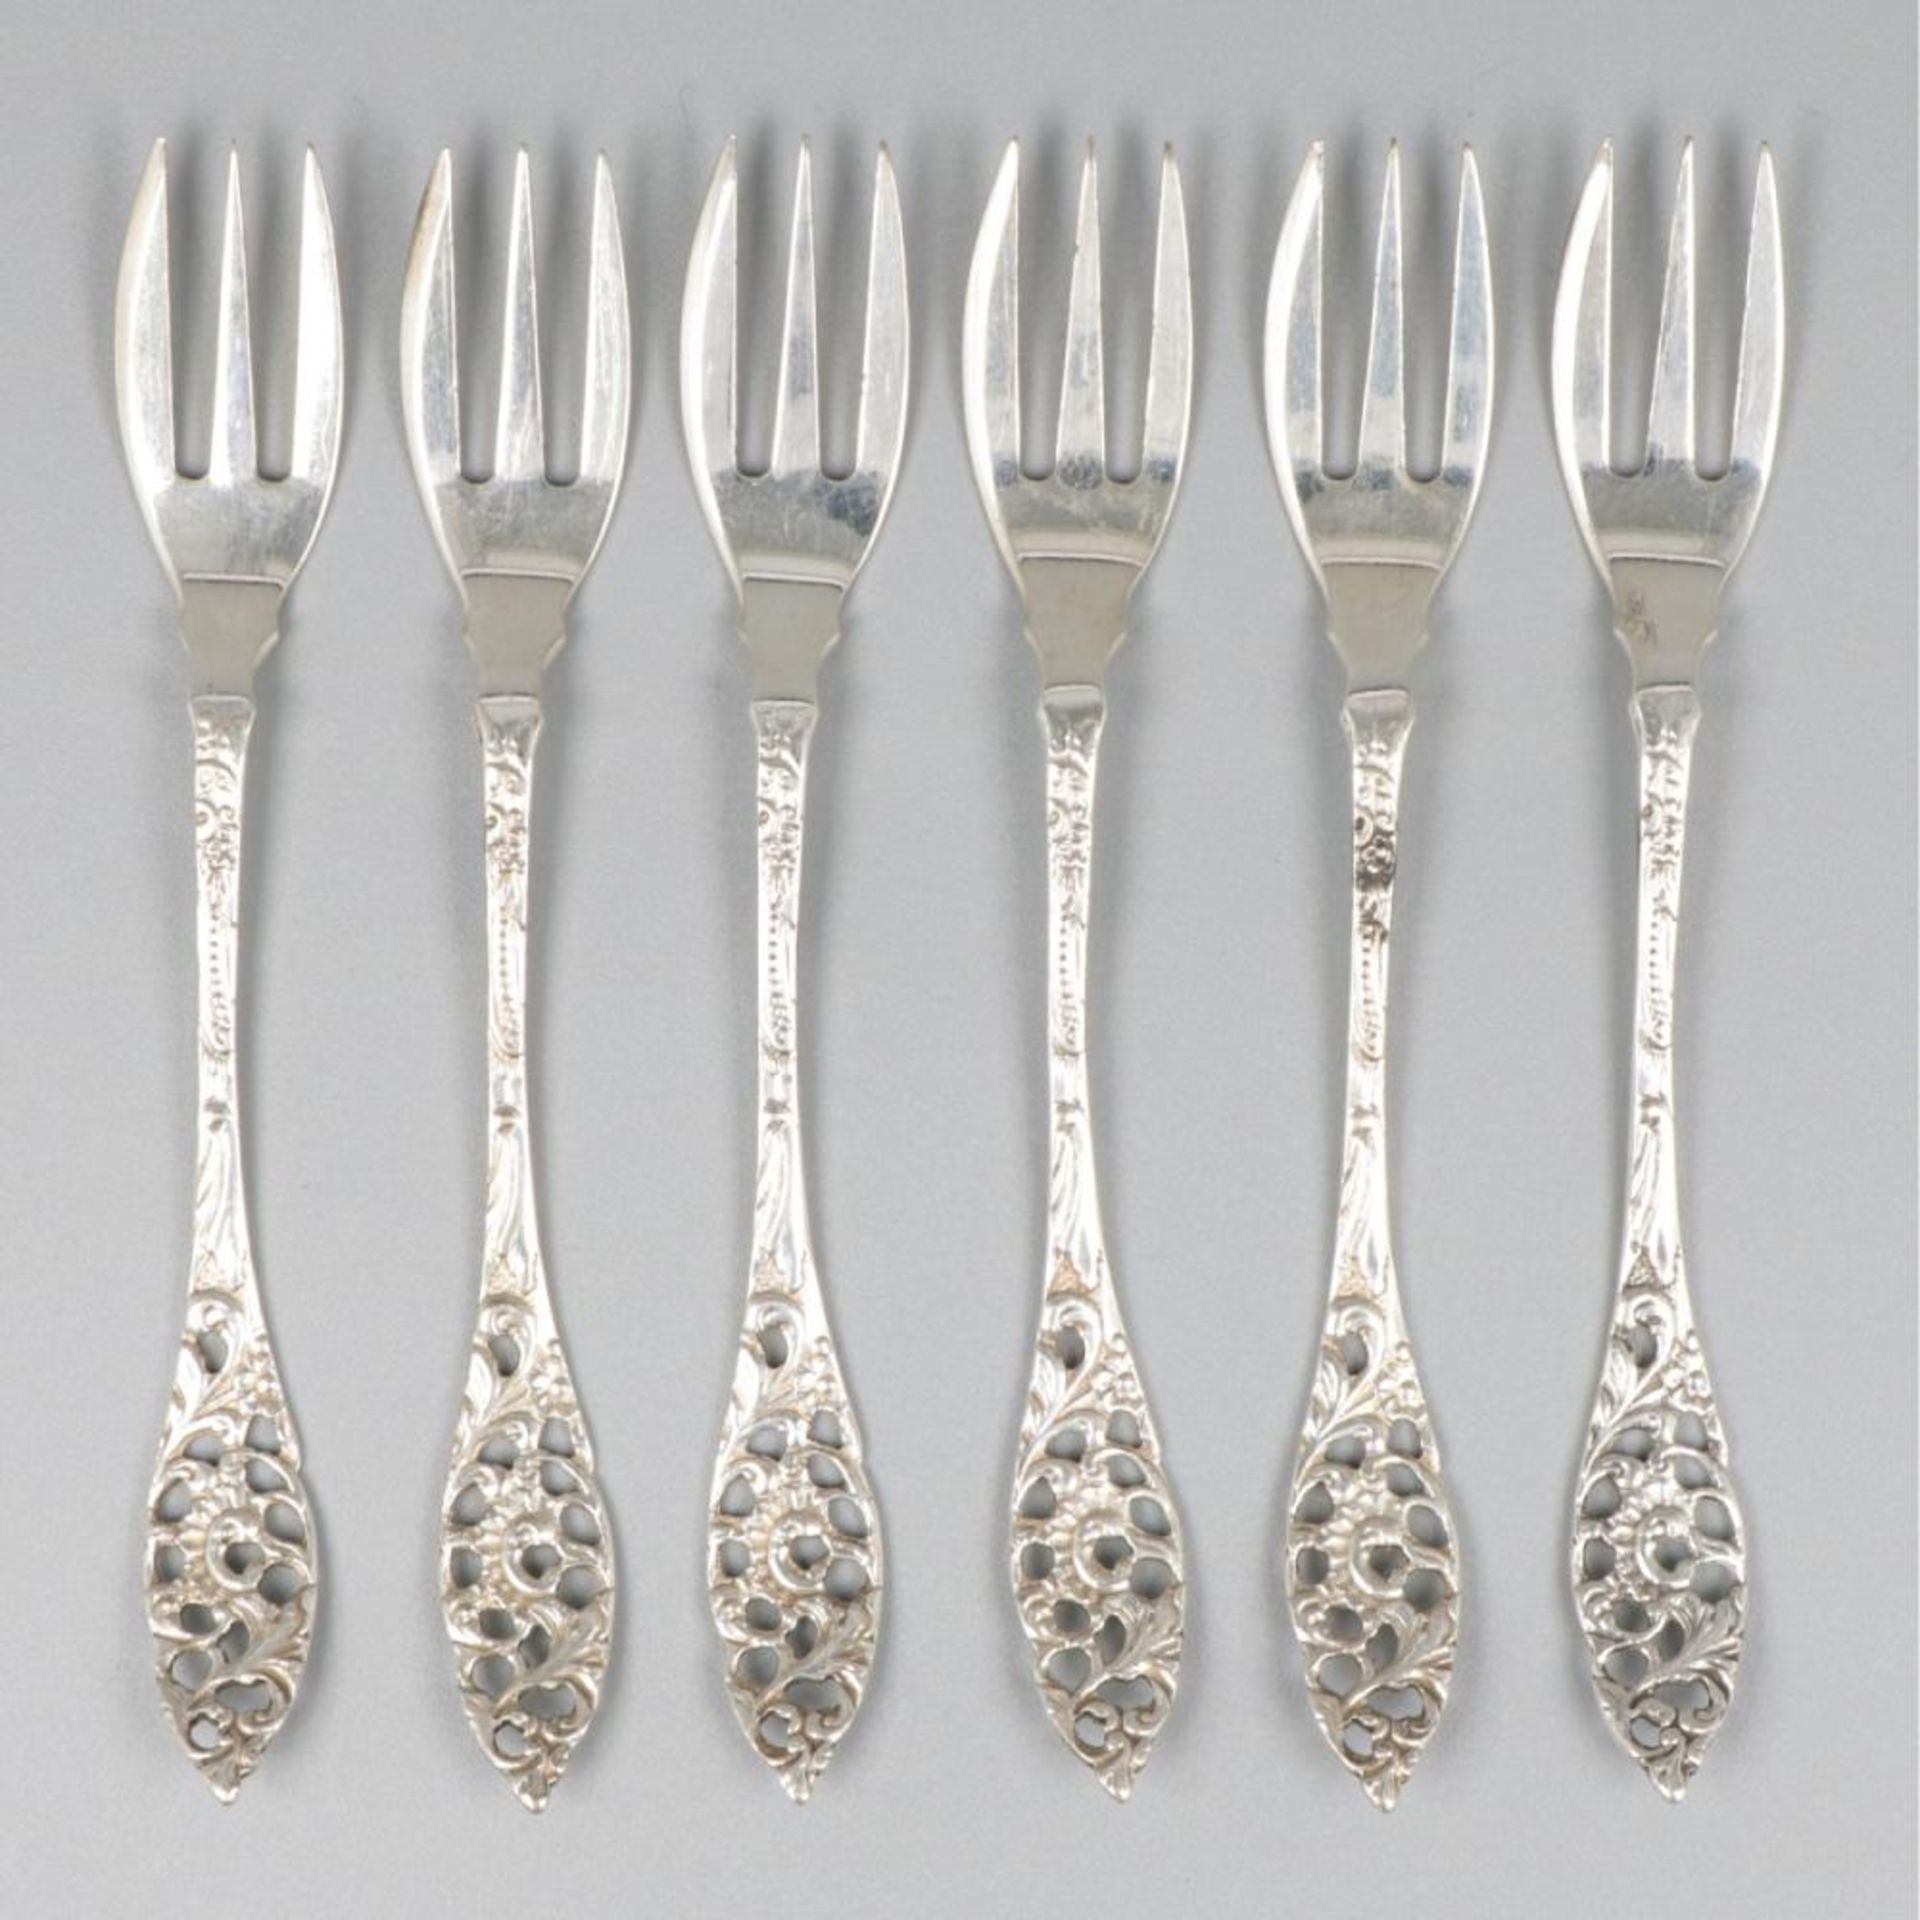 6-piece set of silver cake / pastry forks.